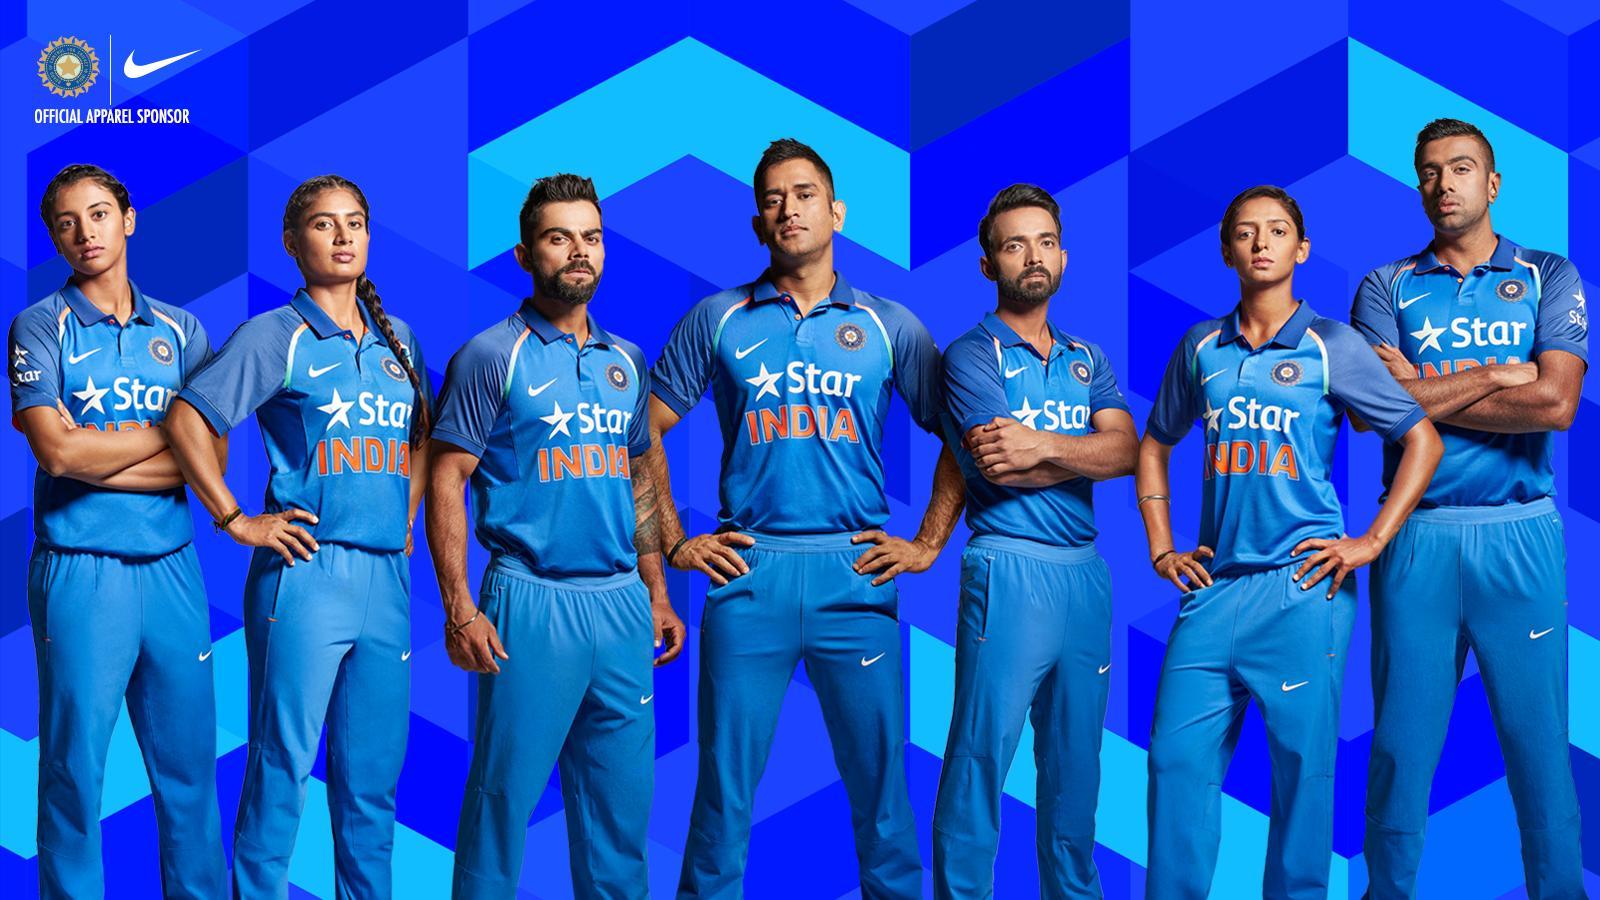 Indian Cricket Team for Android